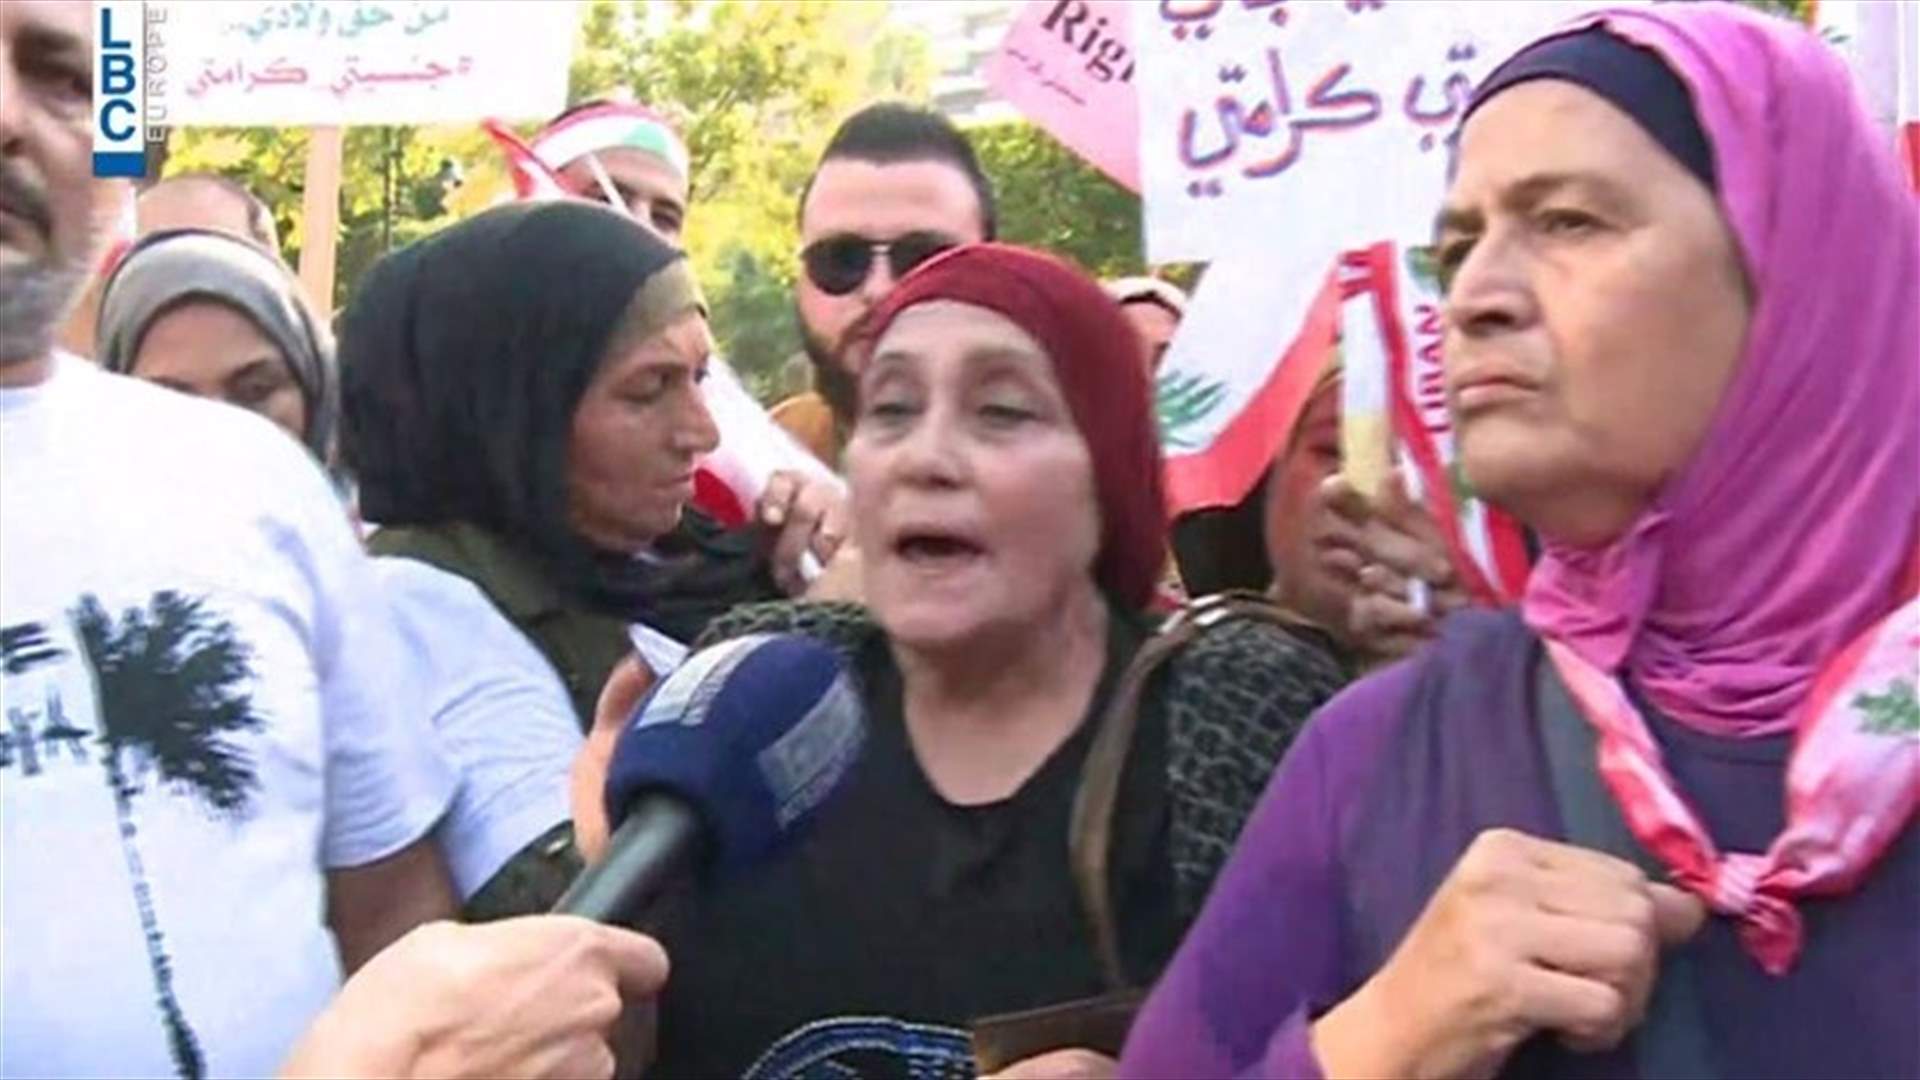 Women rights activists march from Interior Ministry to Riad al-Solh